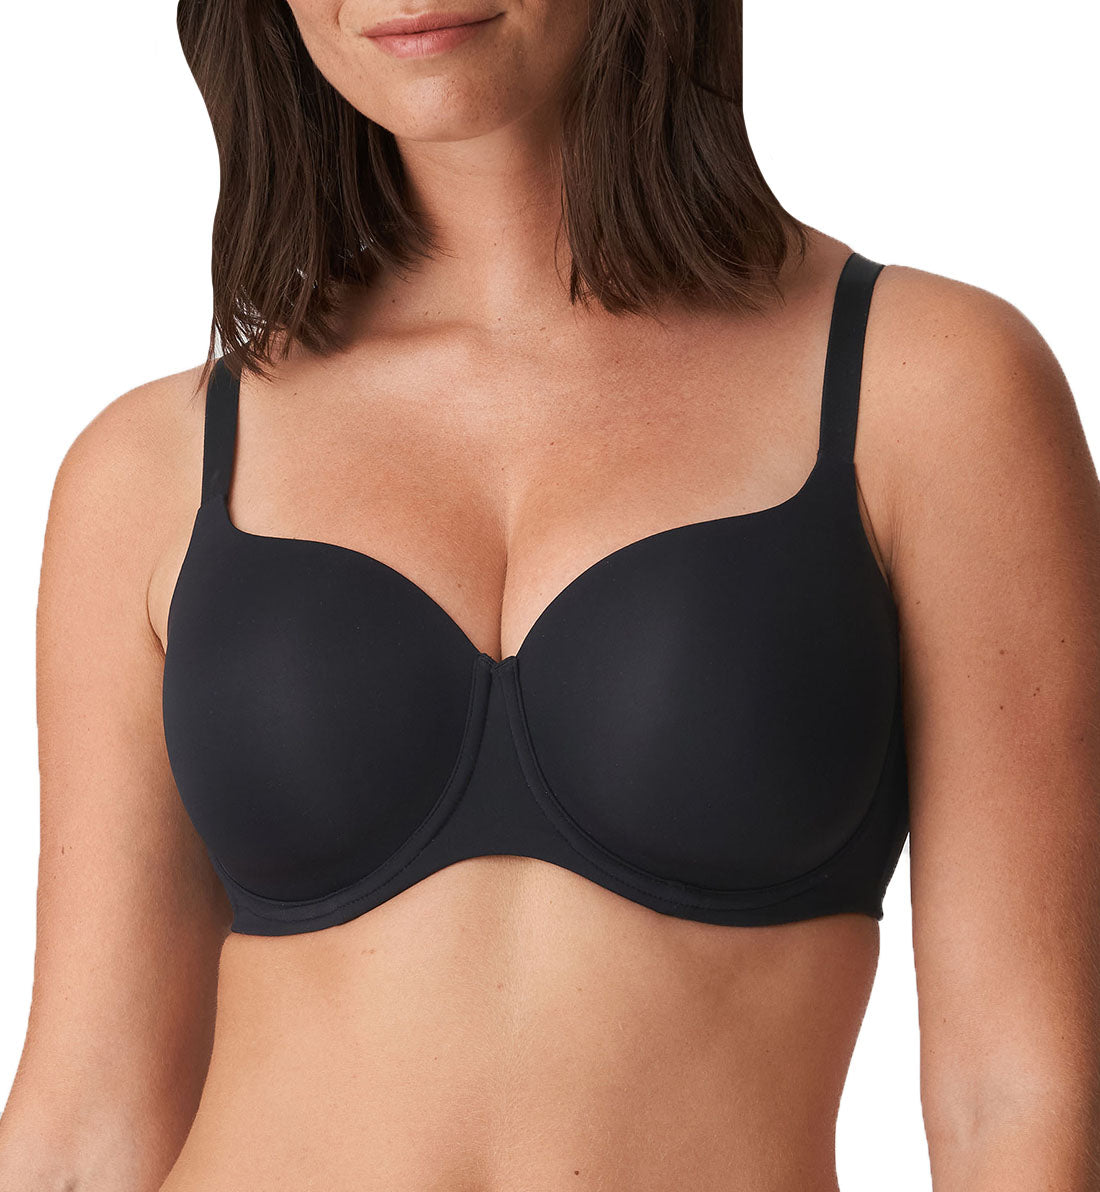 Strapless Bras, Free shipping in the US